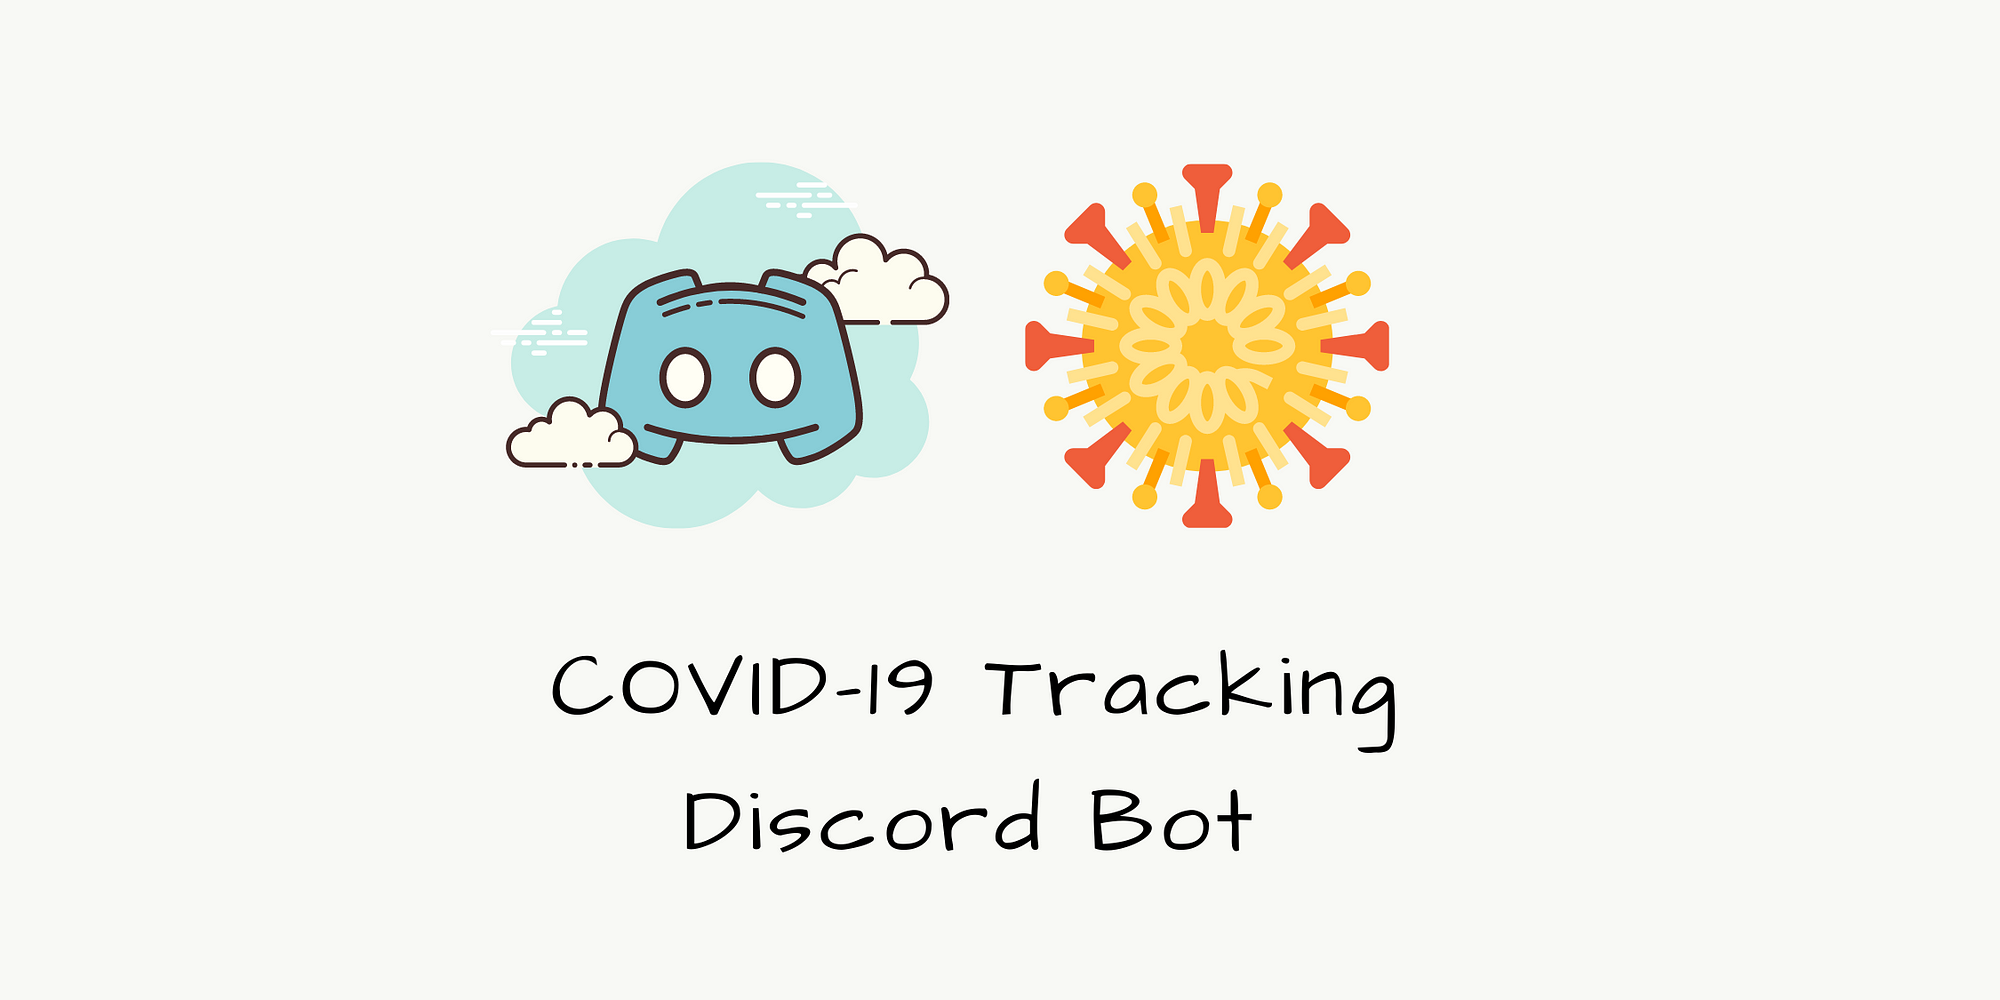 A Discord Bot to Track COVID-19. It's simpler than you think | by Giuseppe  | The Dev Café | Medium